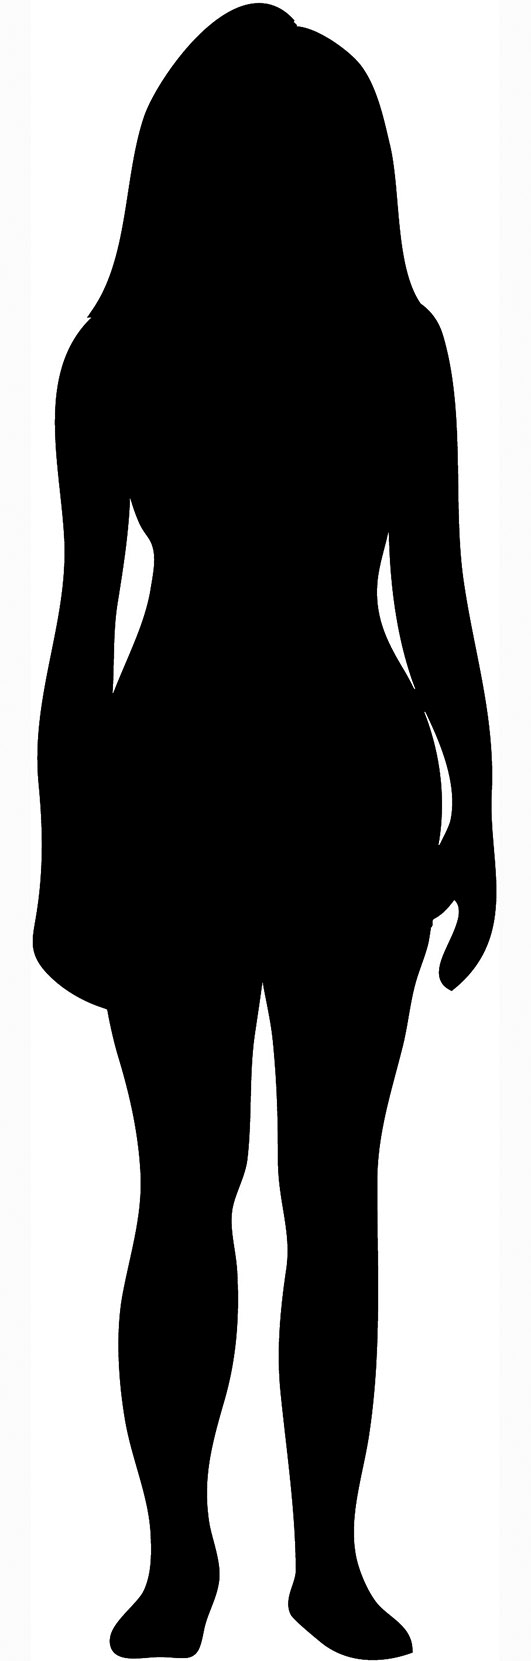 Woman With Short Hair Black Woman Silhouette Silhouette With Outline